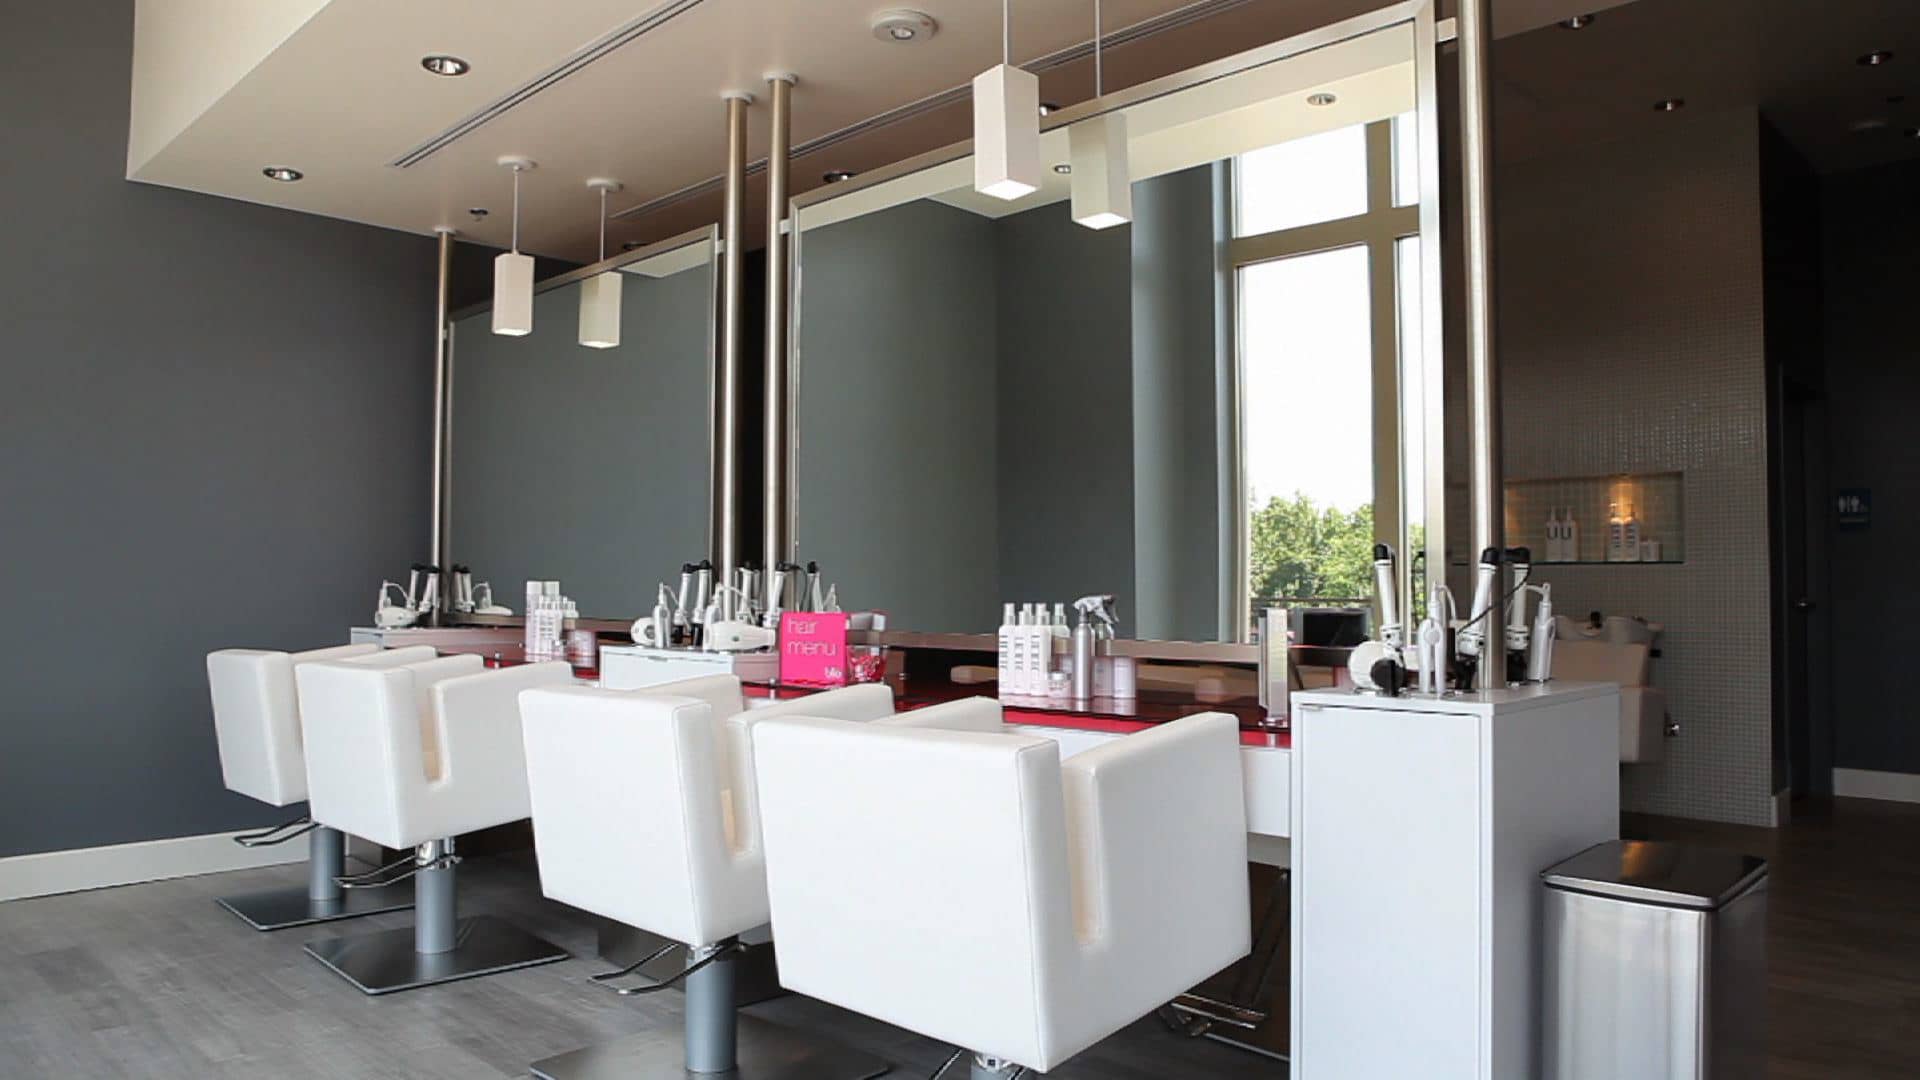 Check Out Gwyneth Paltrows Newest Blo Blow Dry Bar On Vimeo 